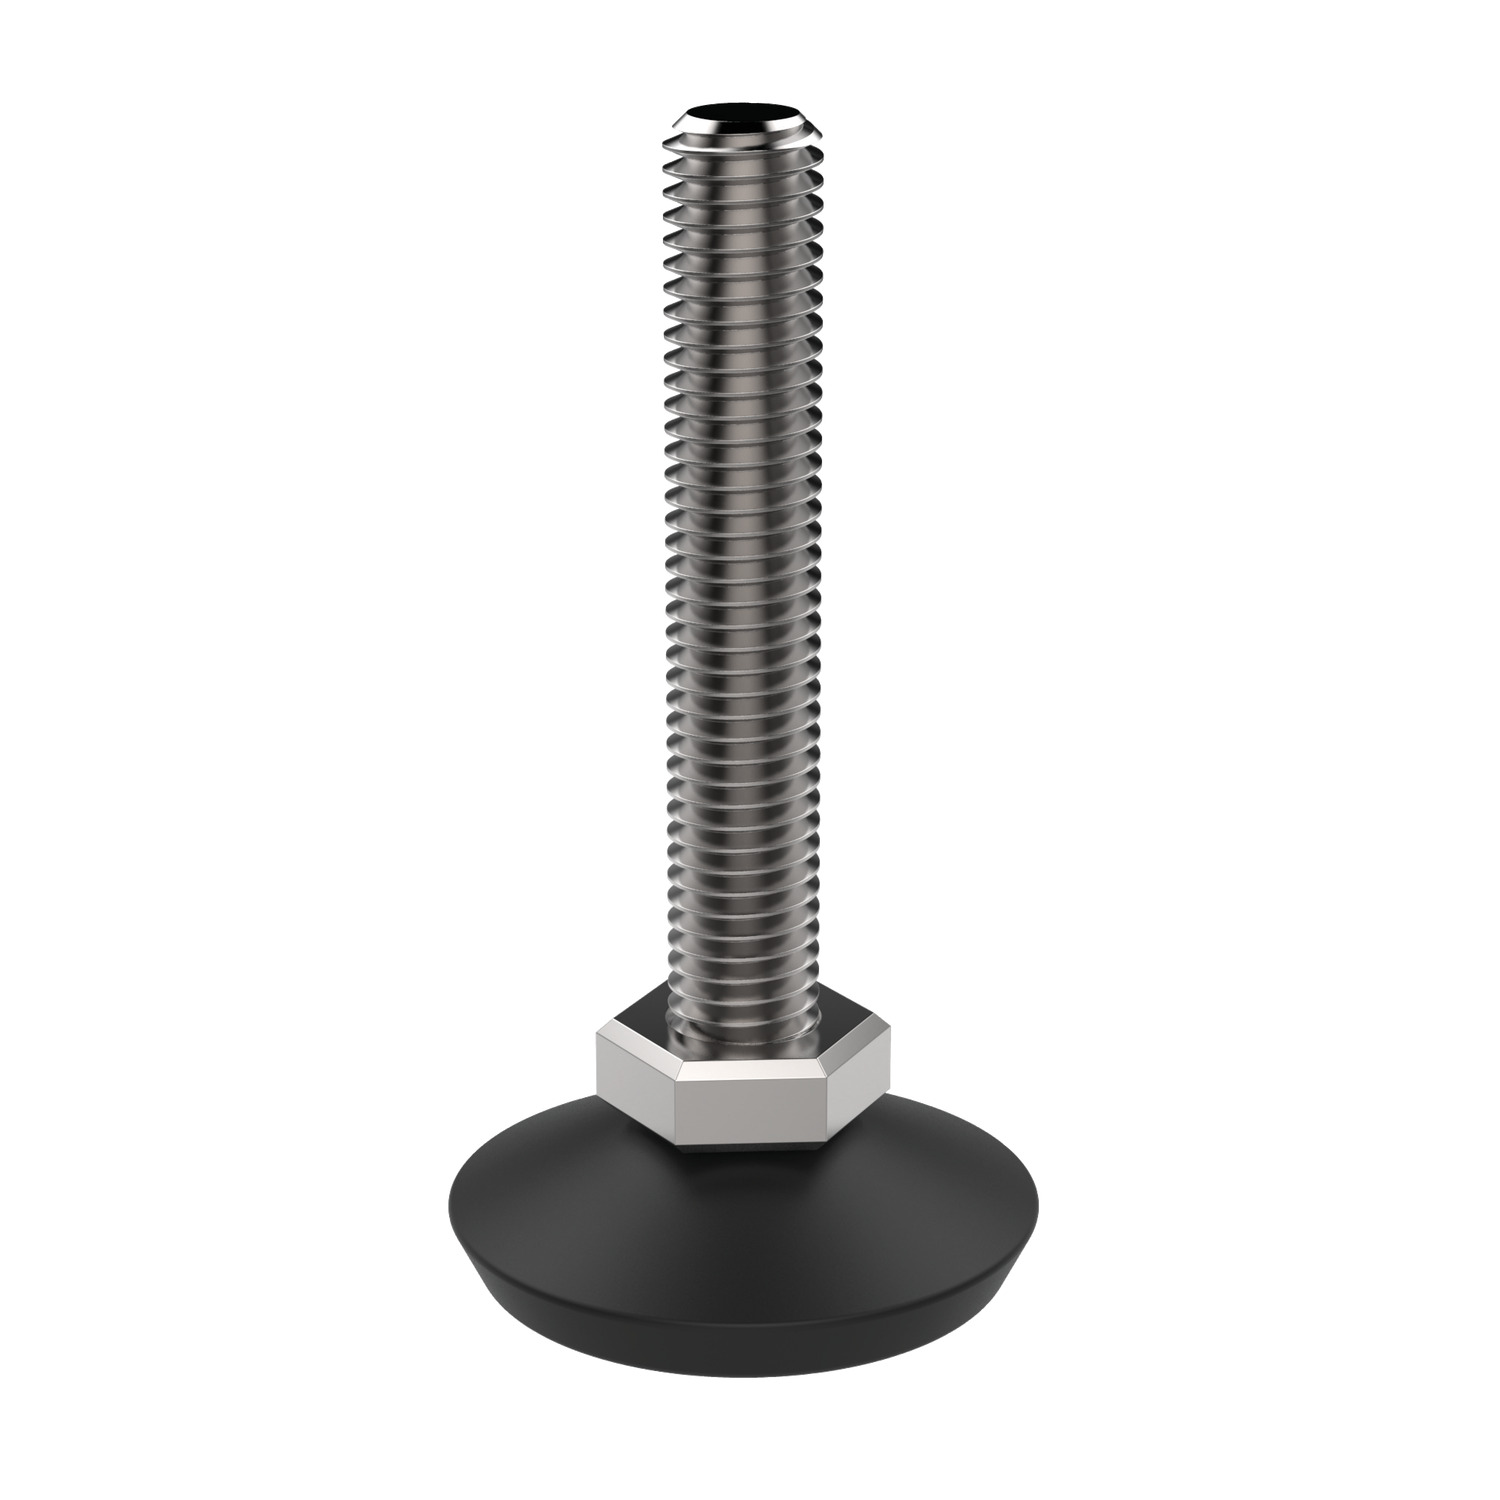 Mini Levelling Feet Longer thread style mini levelling feet made from galvanised with plastic base. Smaller thread suitable for lower profile, lightweight applications.